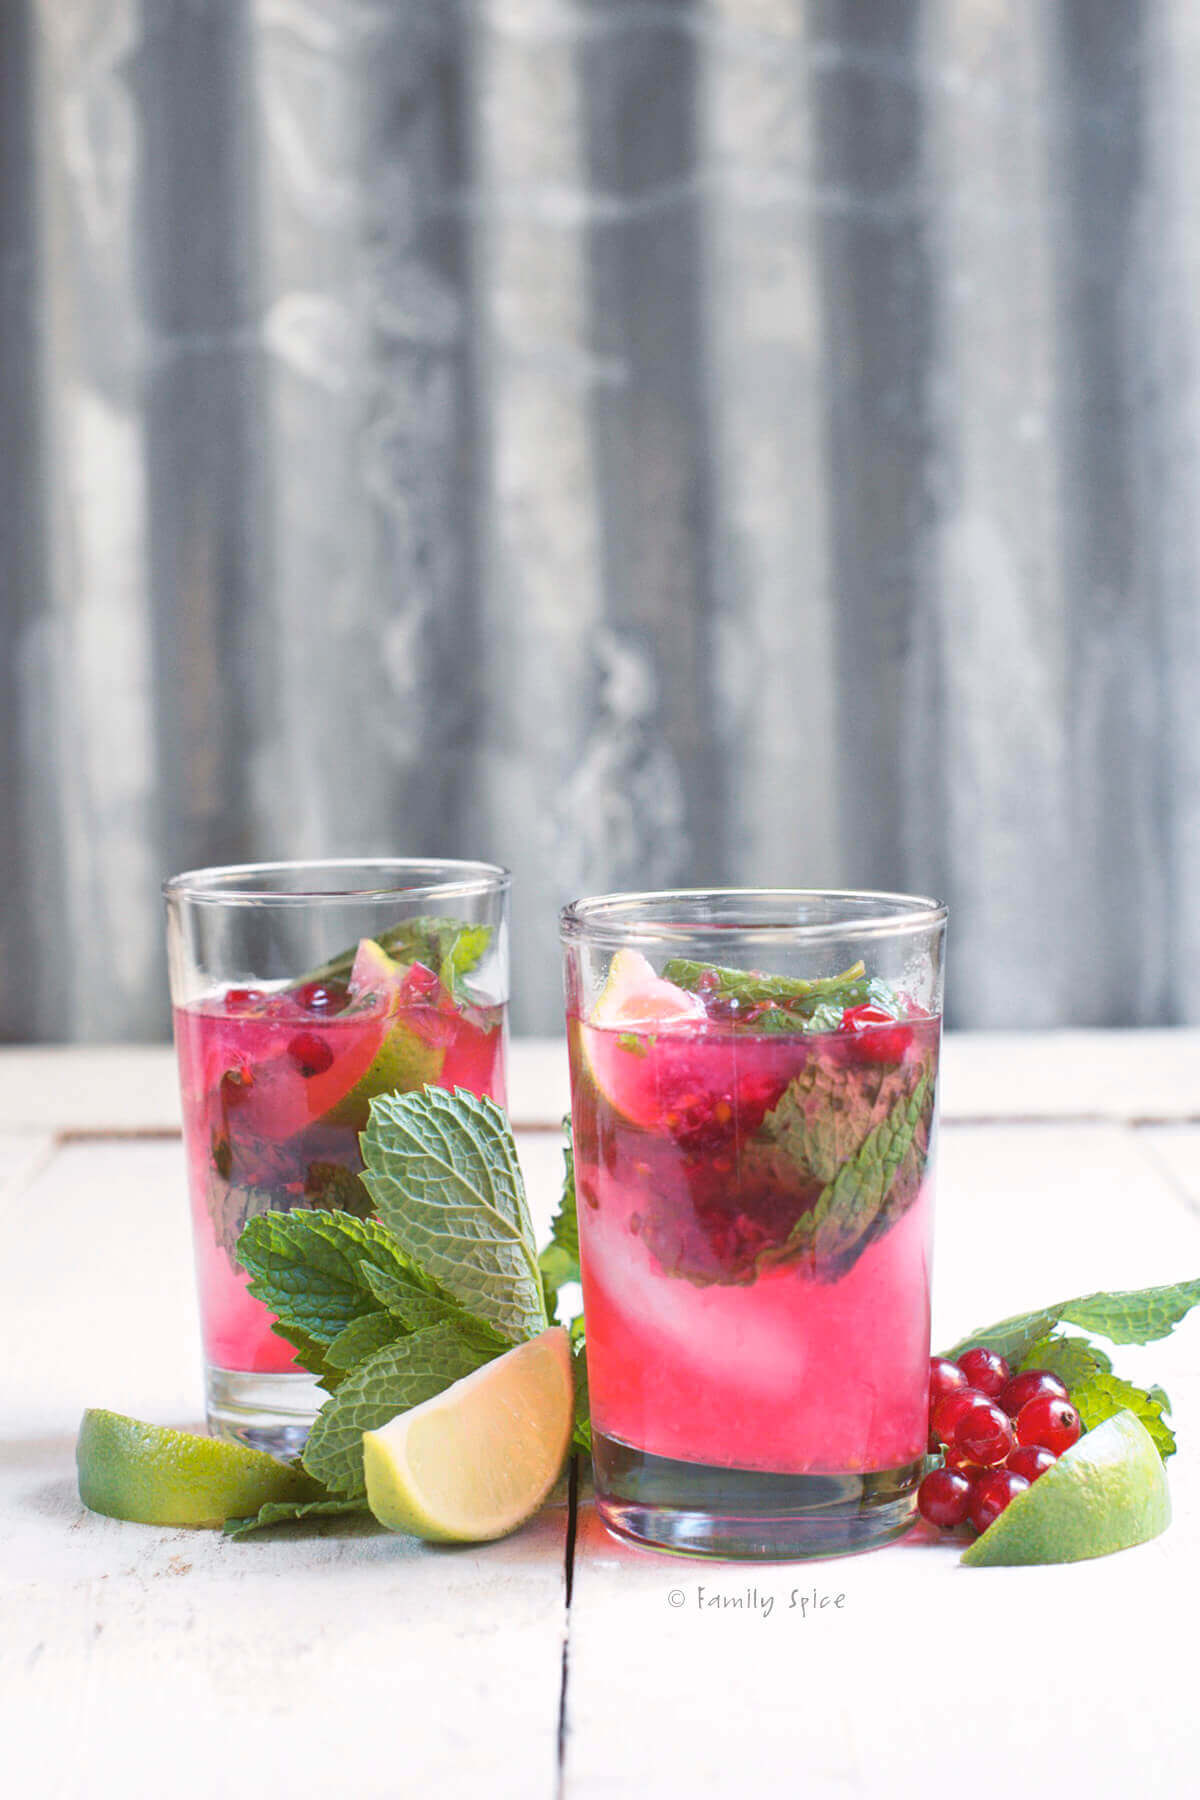 Side view of two glasses of red currant mojito with fresh mint, red currants and lime wedges next to it